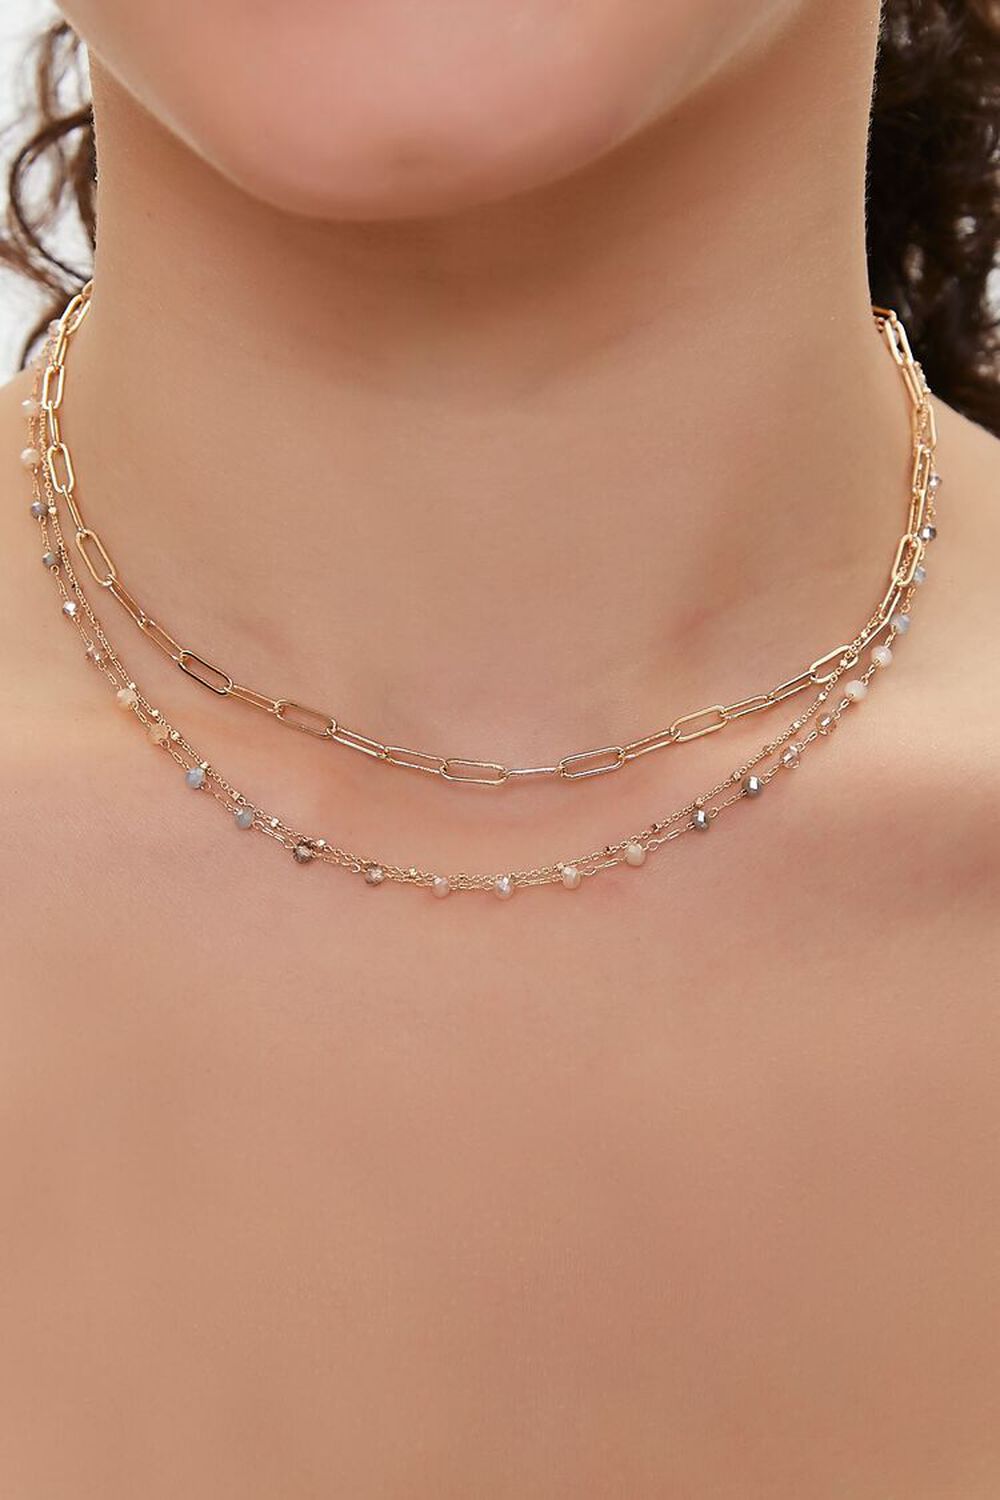 Faux Gem Layered Chain Necklace, image 1